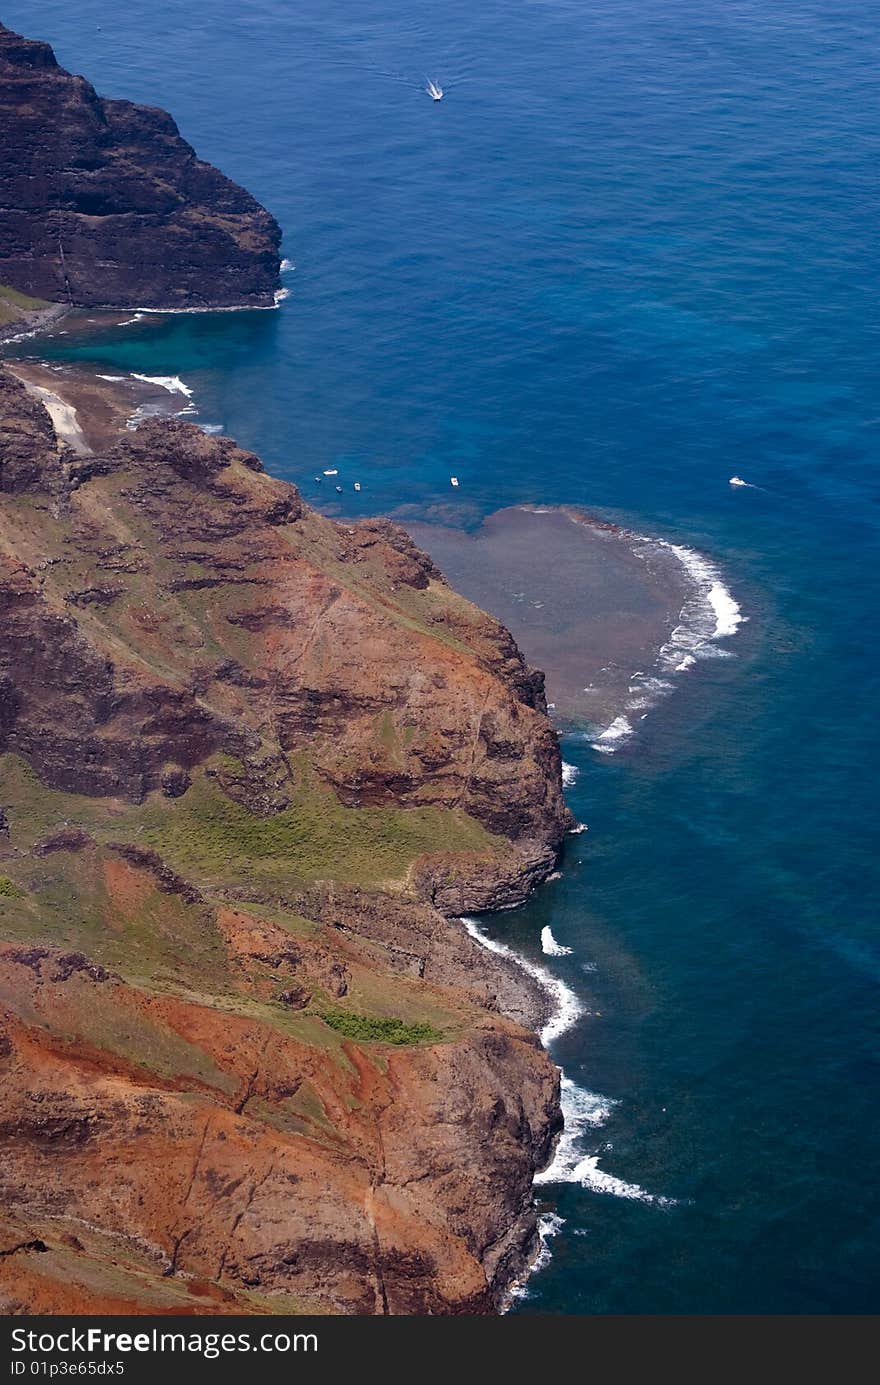 Looking down on the hawaiian coastline, shot from above shot from a helicopter above kaua'i